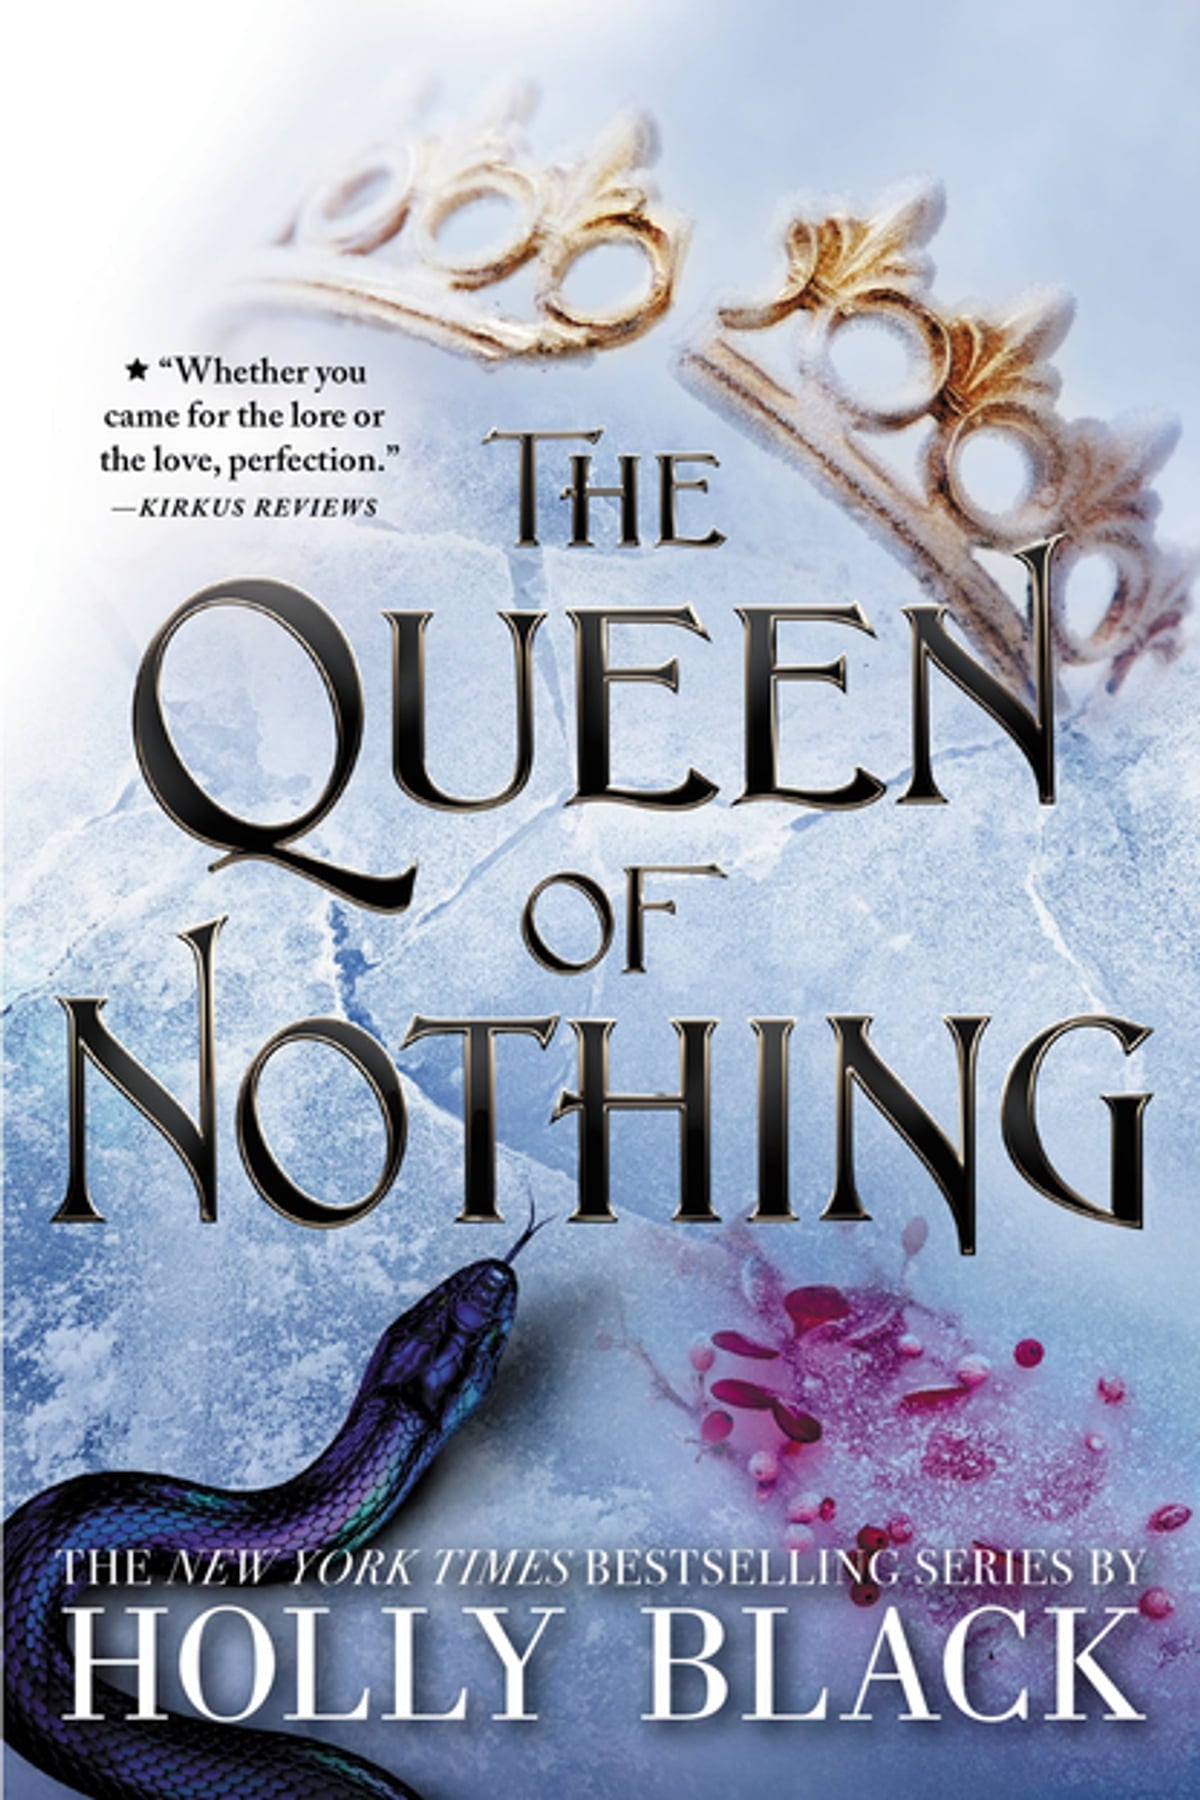 The Queen of Nothing by Holly Black (The Folk of the Air #3)